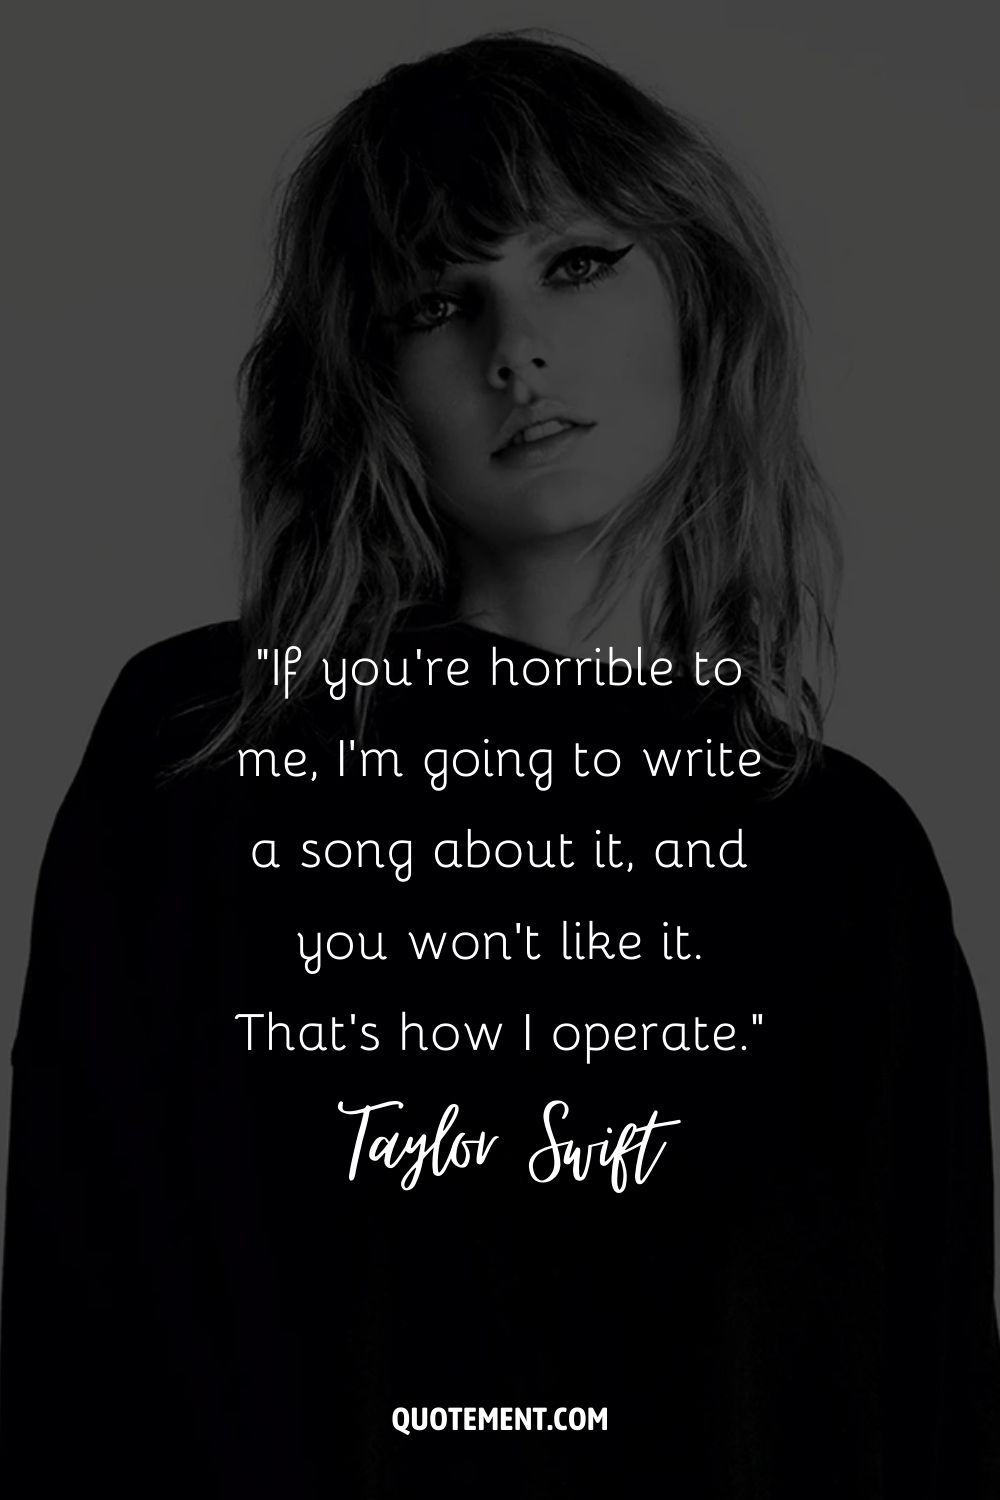 “If you're horrible to me, I'm going to write a song about it, and you won't like it. That's how I operate.” ― Taylor Swift